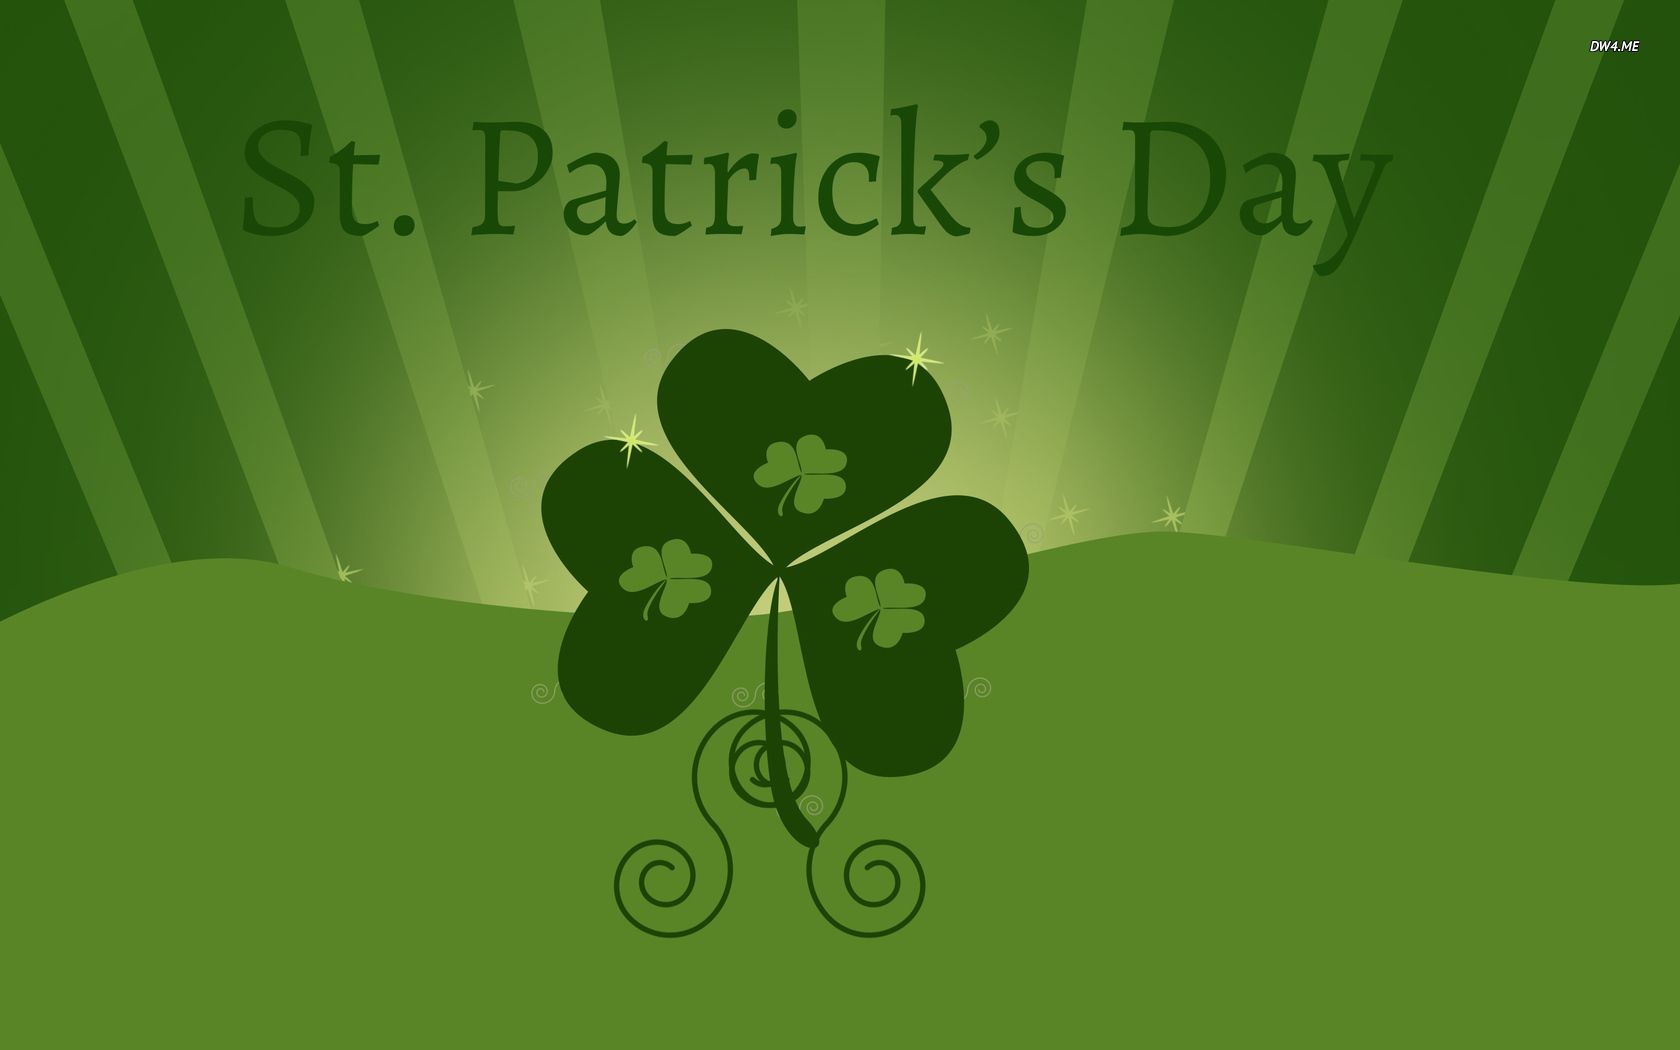 St. Patrick's Day wallpaper - Holiday wallpapers - #2621